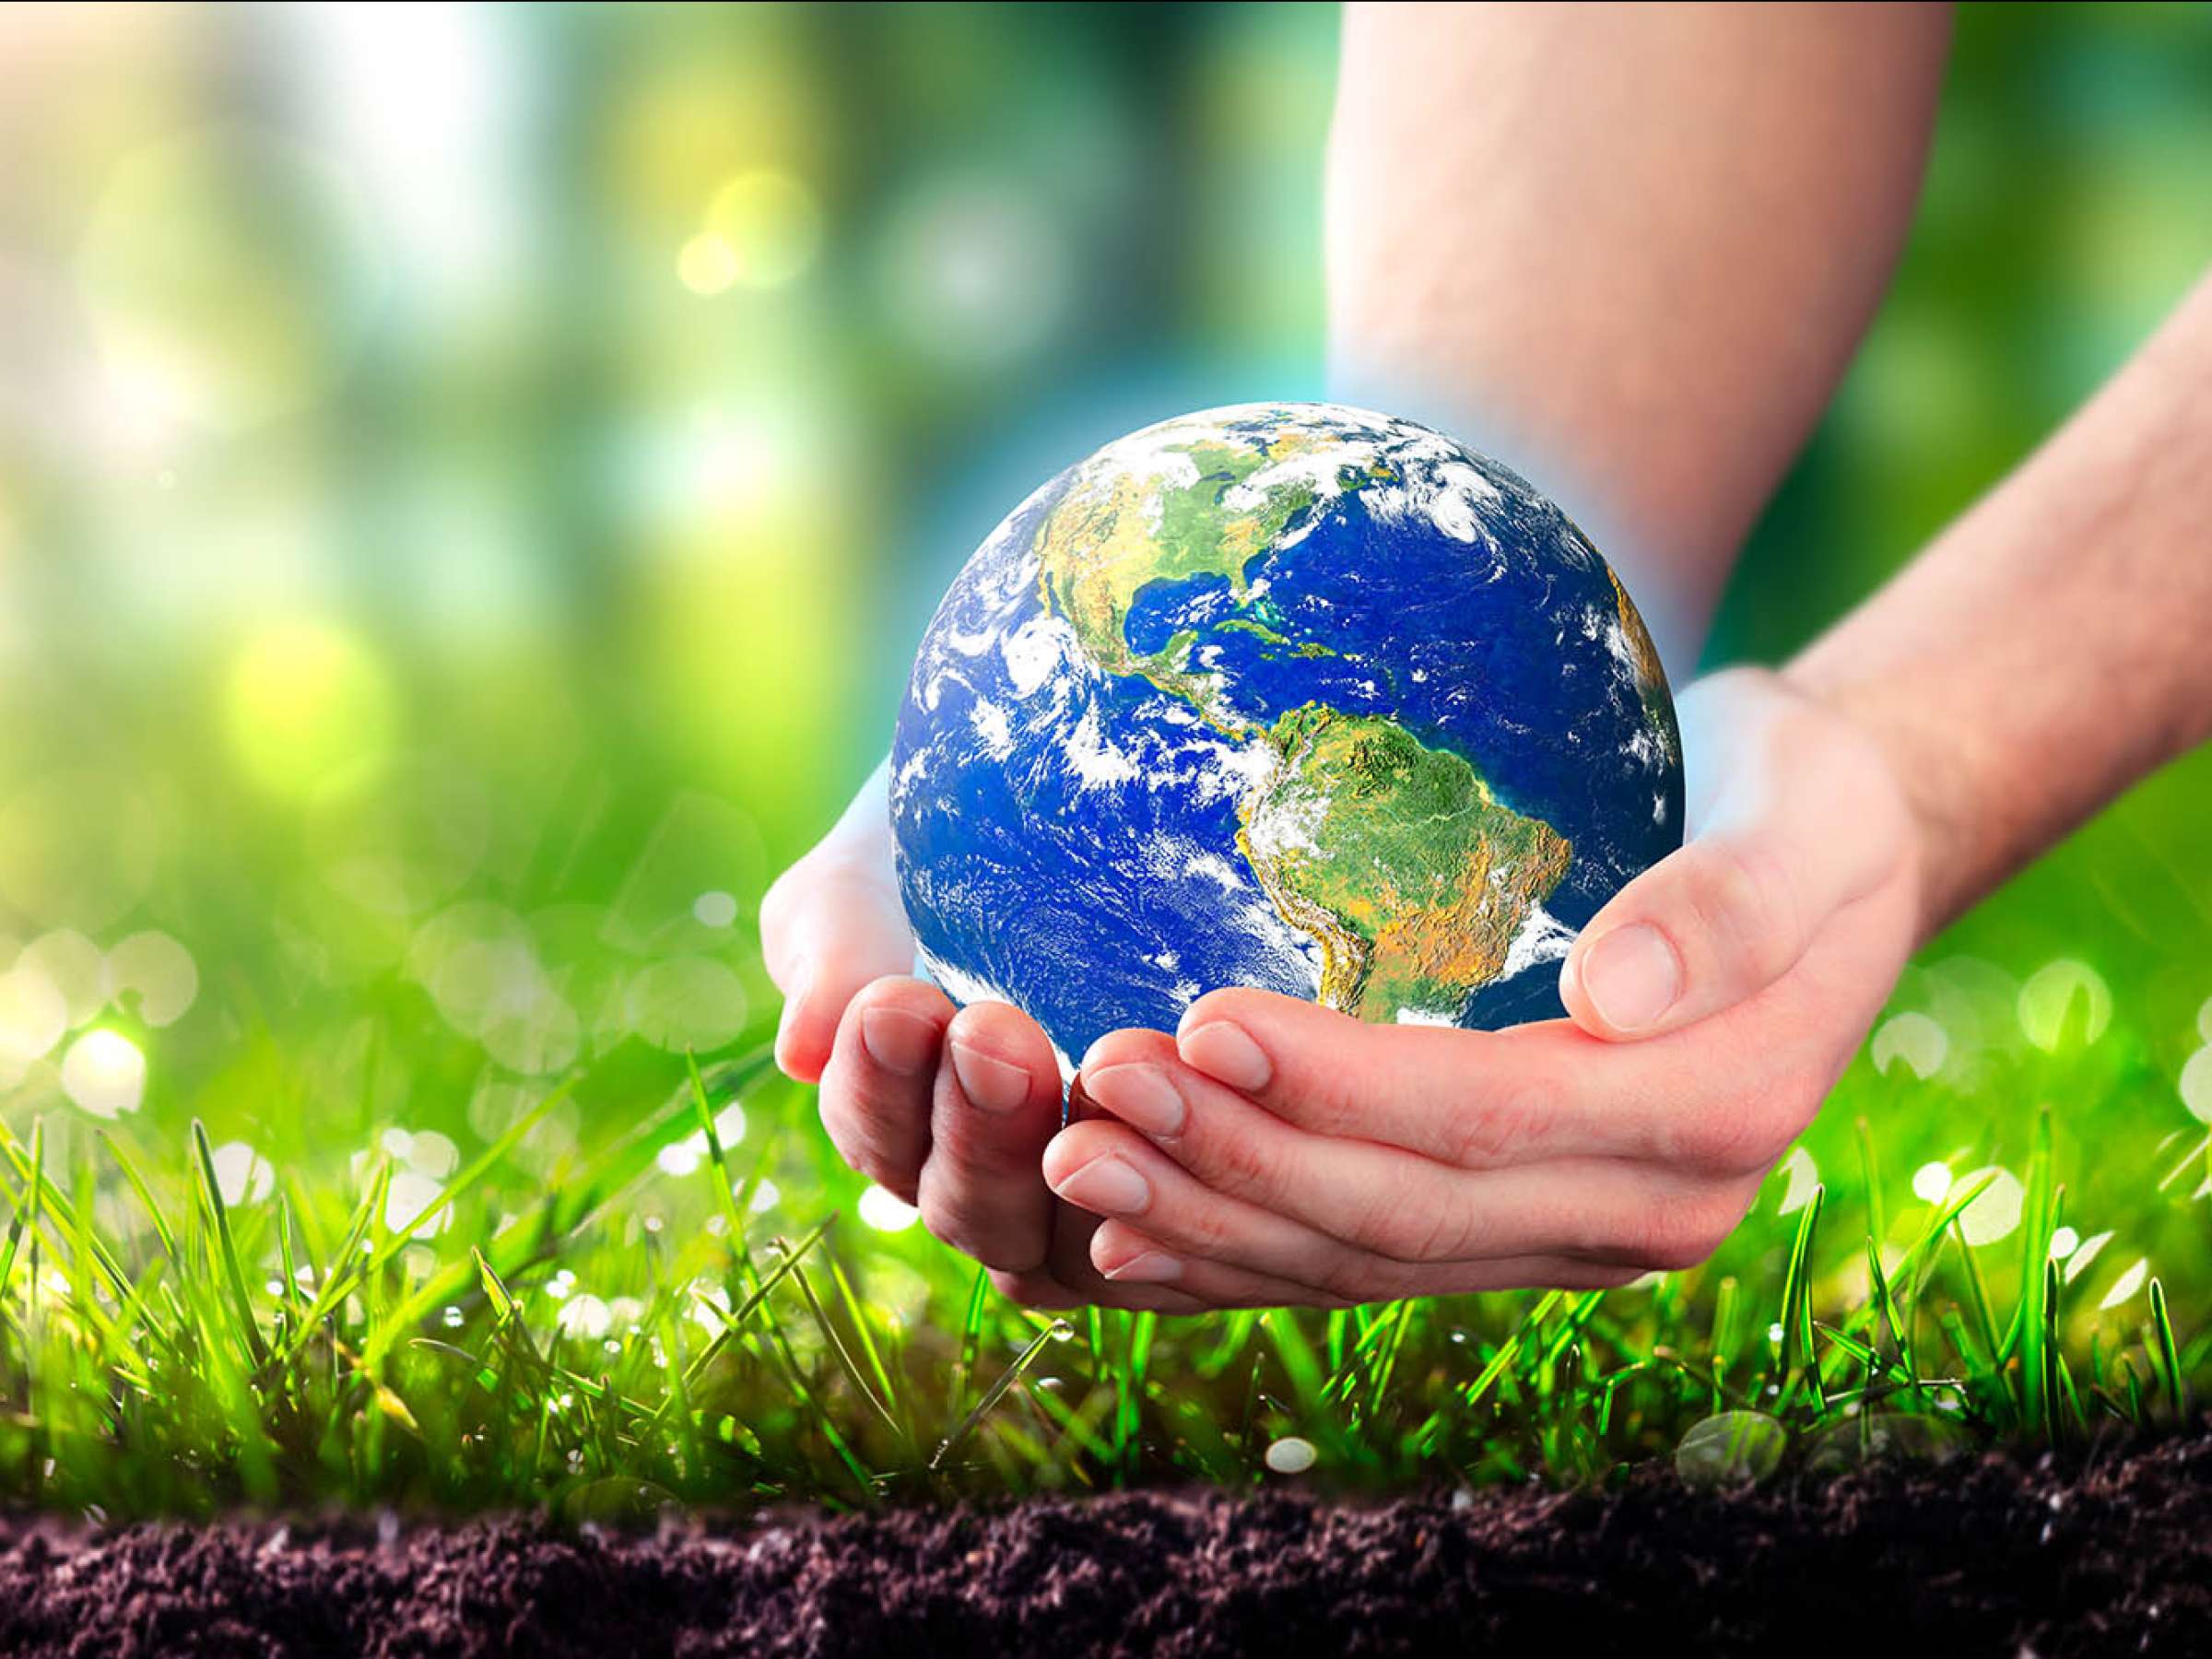 Hands Holding Planet Earth In Lush Green Environment With Soil And Sunlight